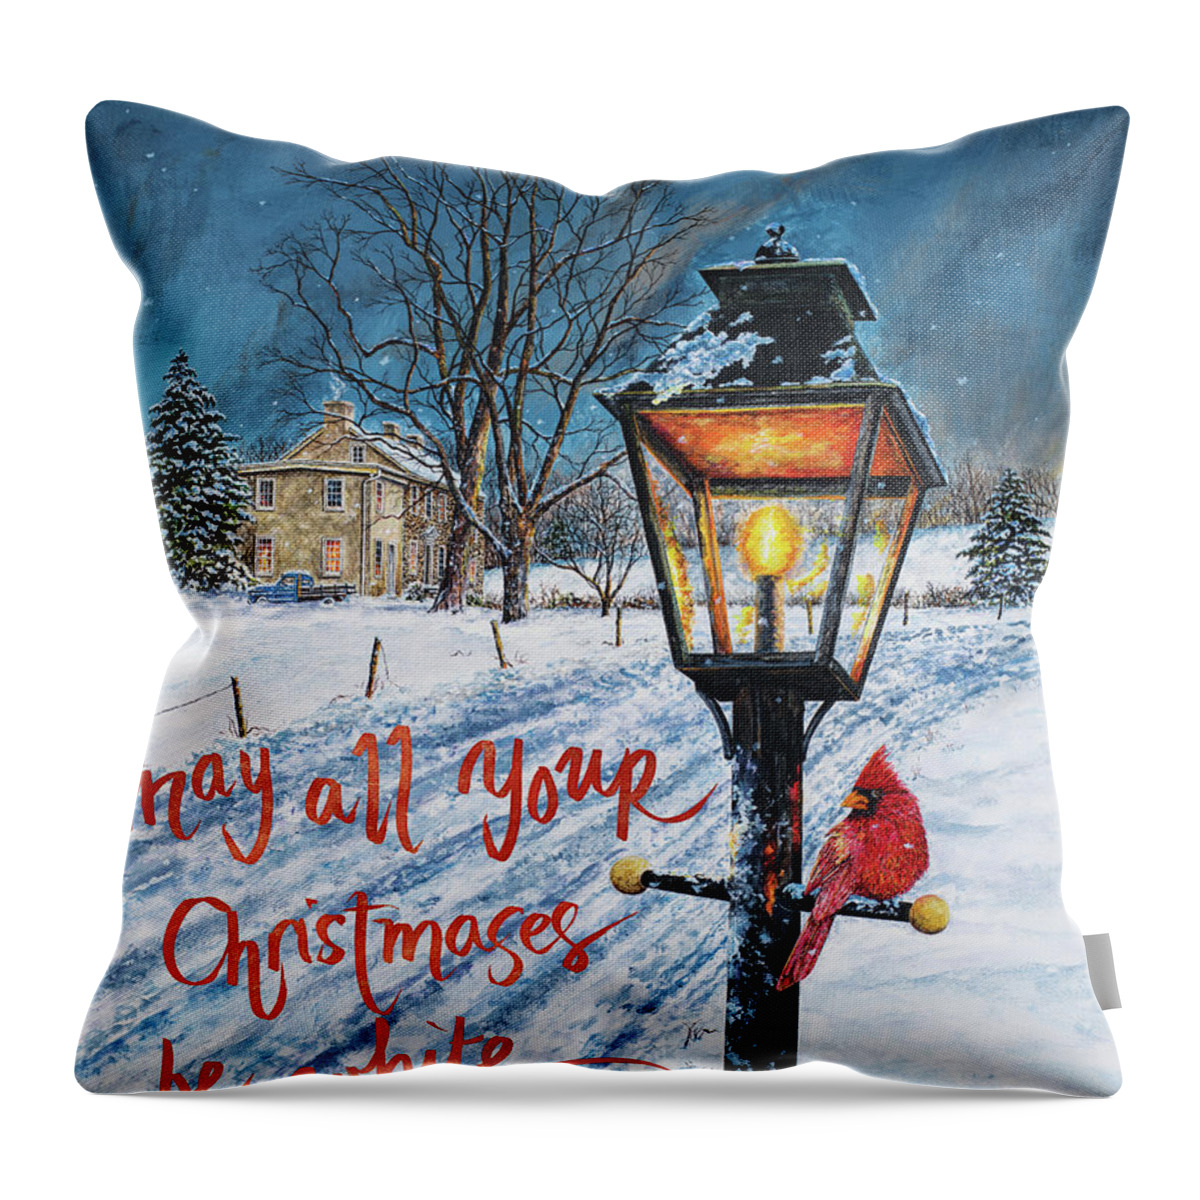 White Throw Pillow featuring the painting White Christmas by James Redding